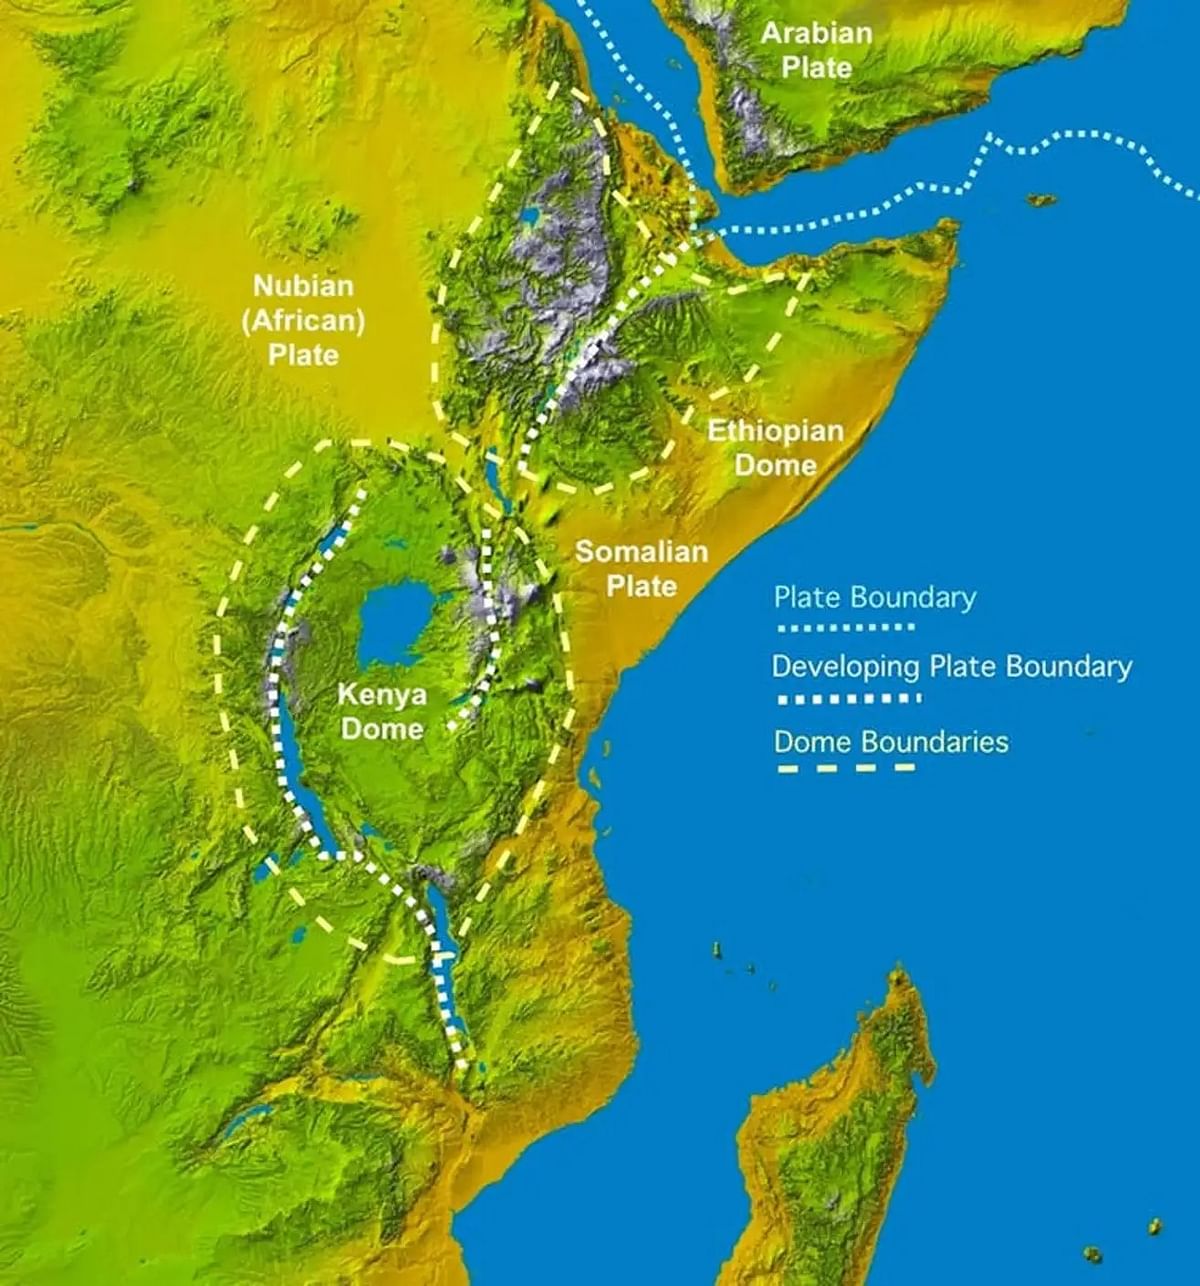 Topography of the Rift Valley